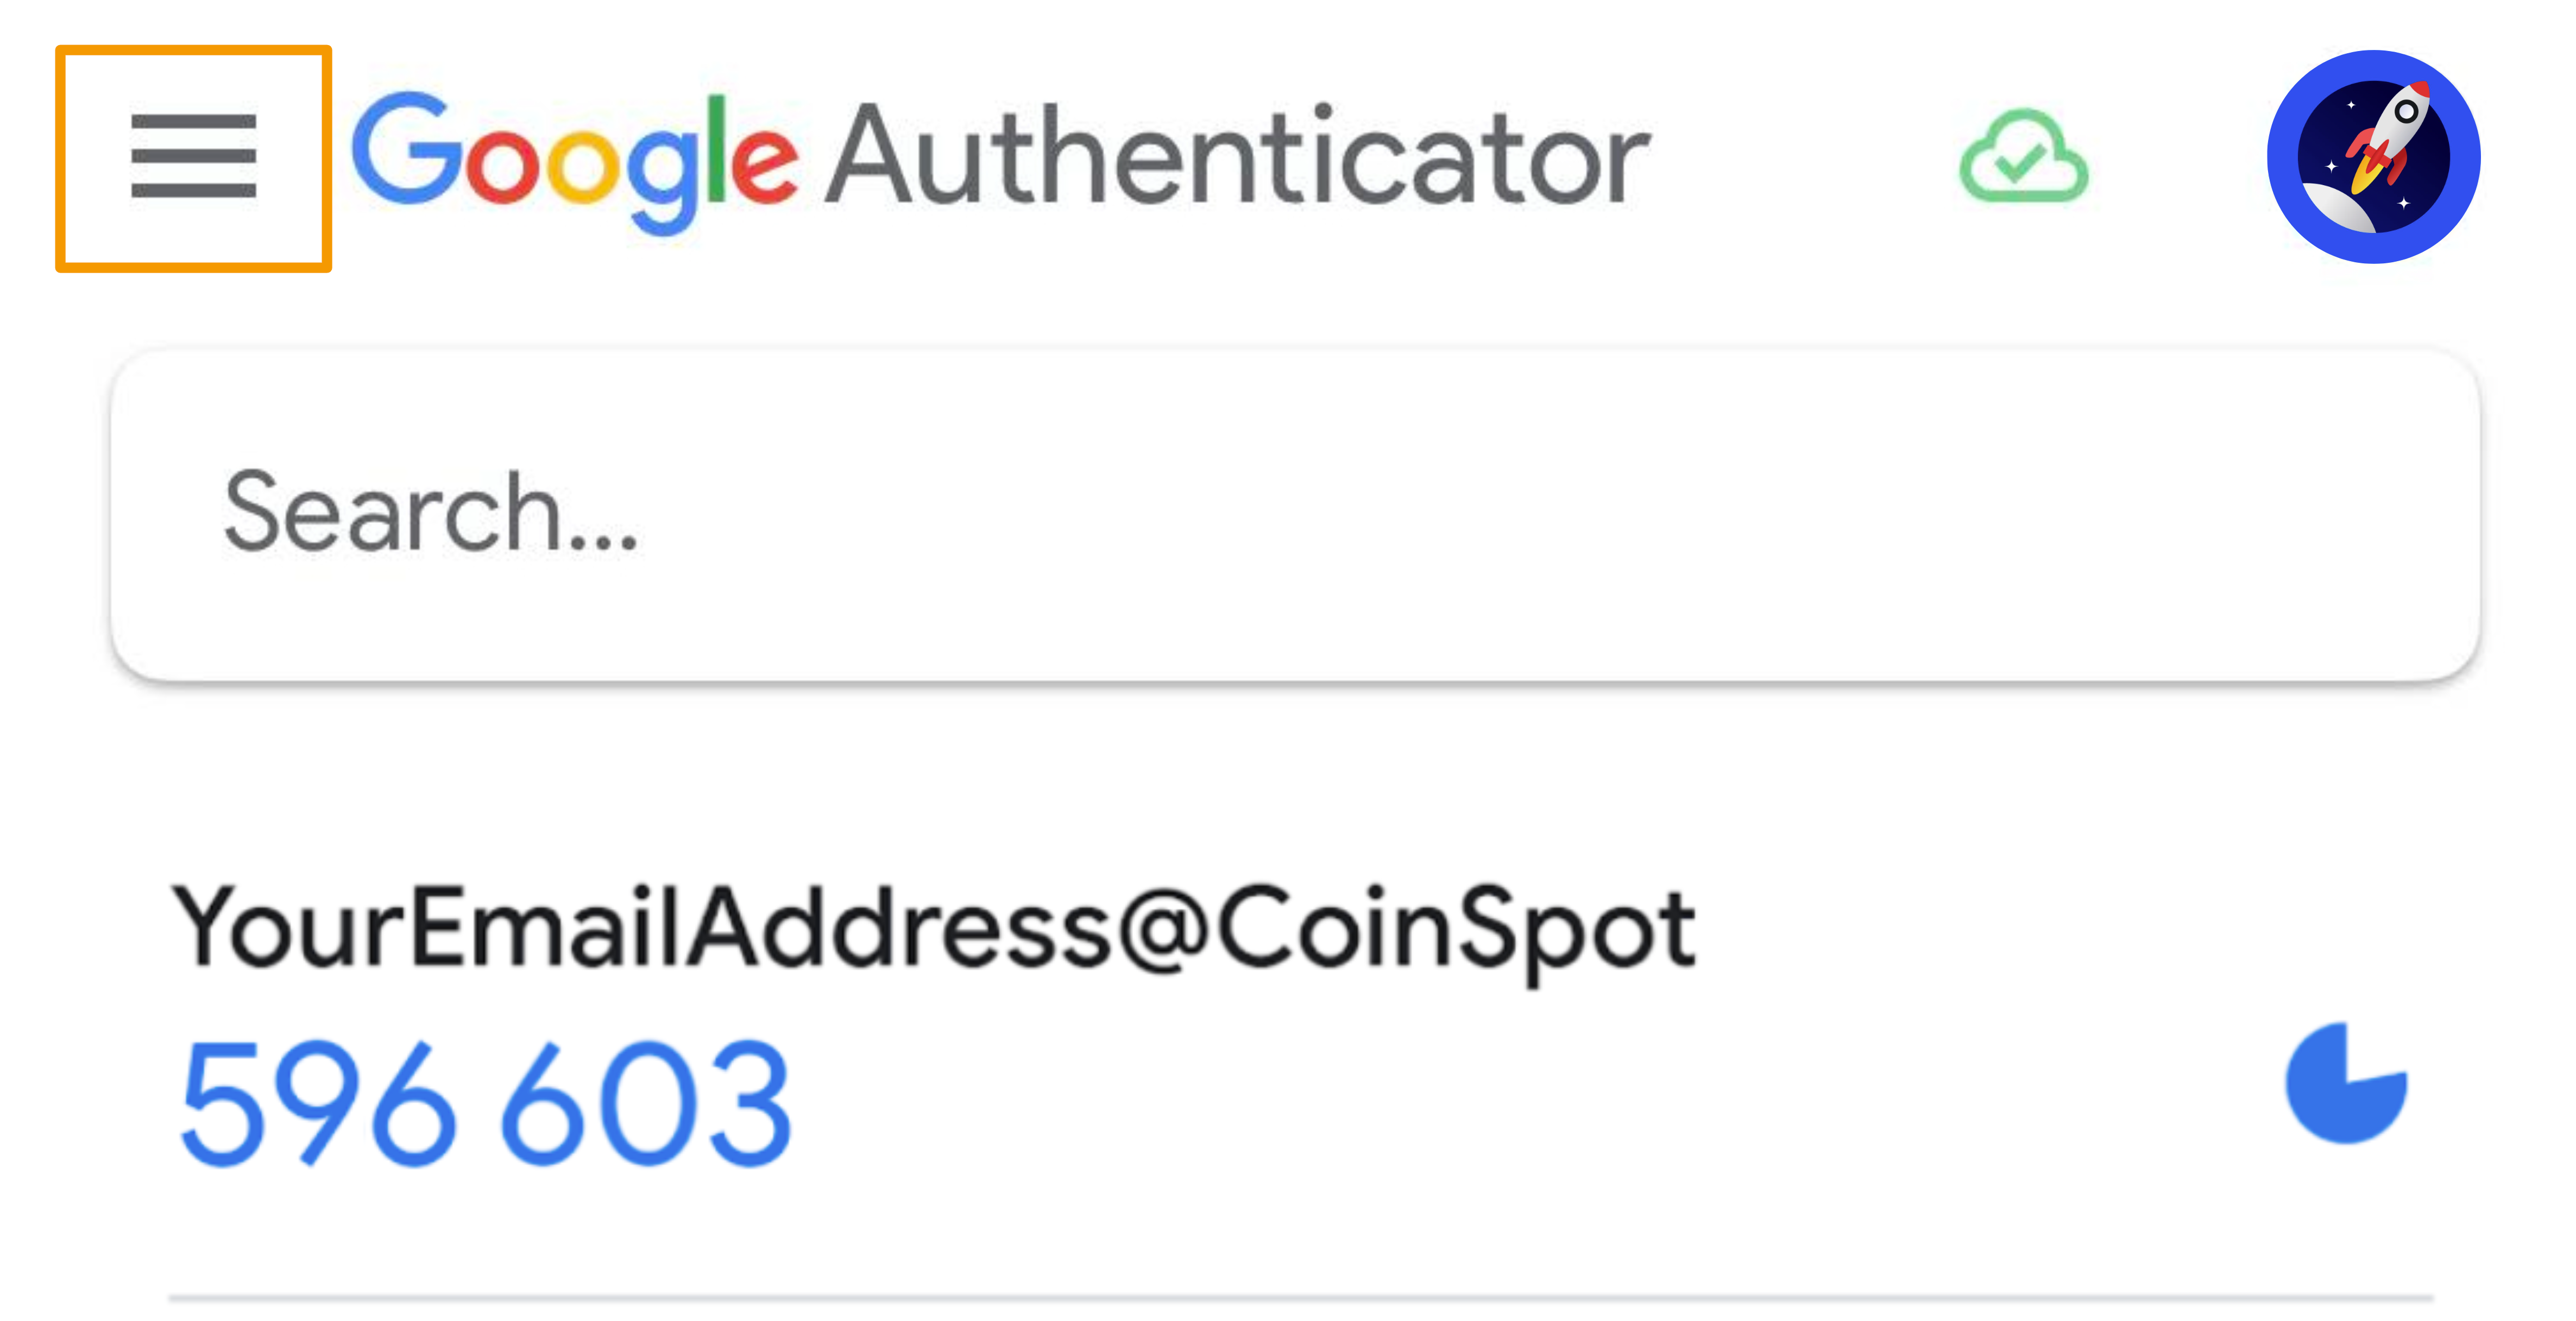 Google_Authenticator_-_3_Lines_Update.png